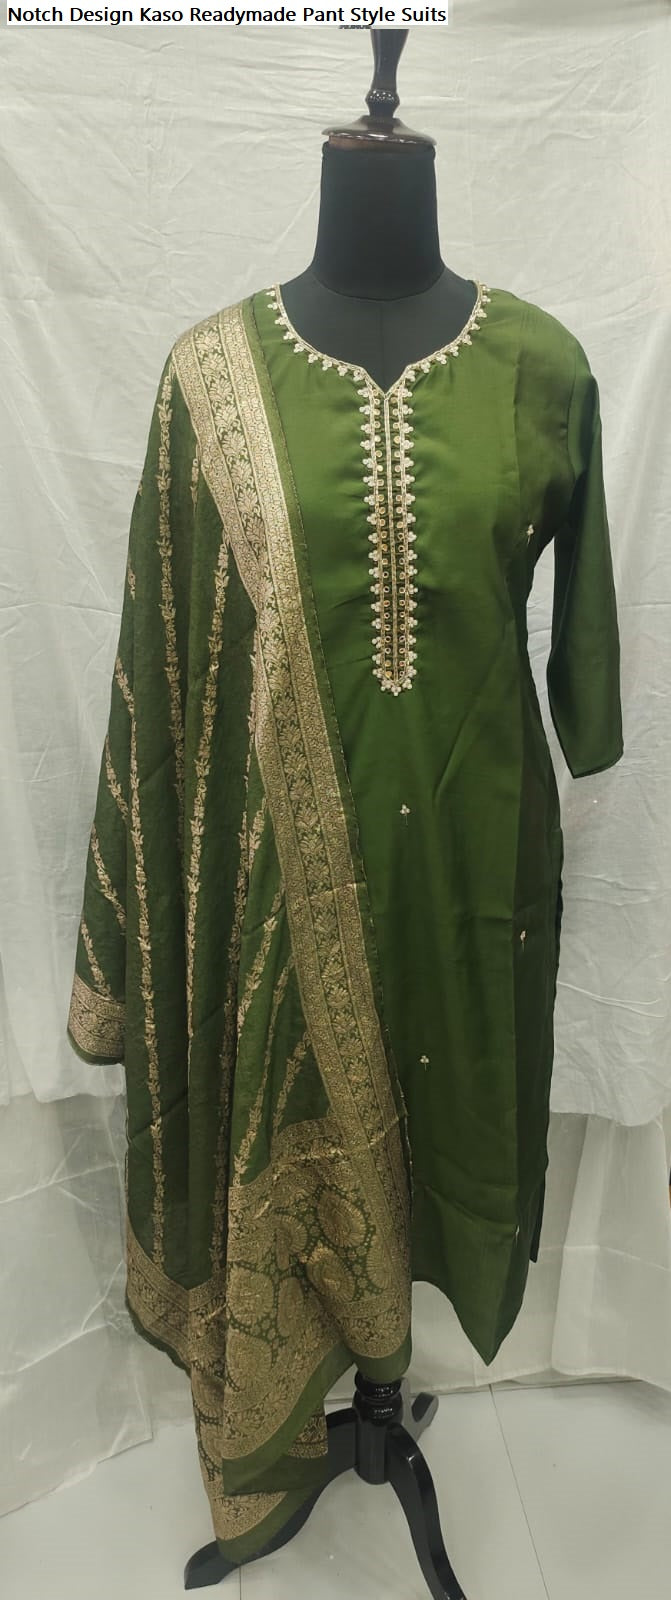 Notch Design Kaso Silk Readymade Pant Style Suits